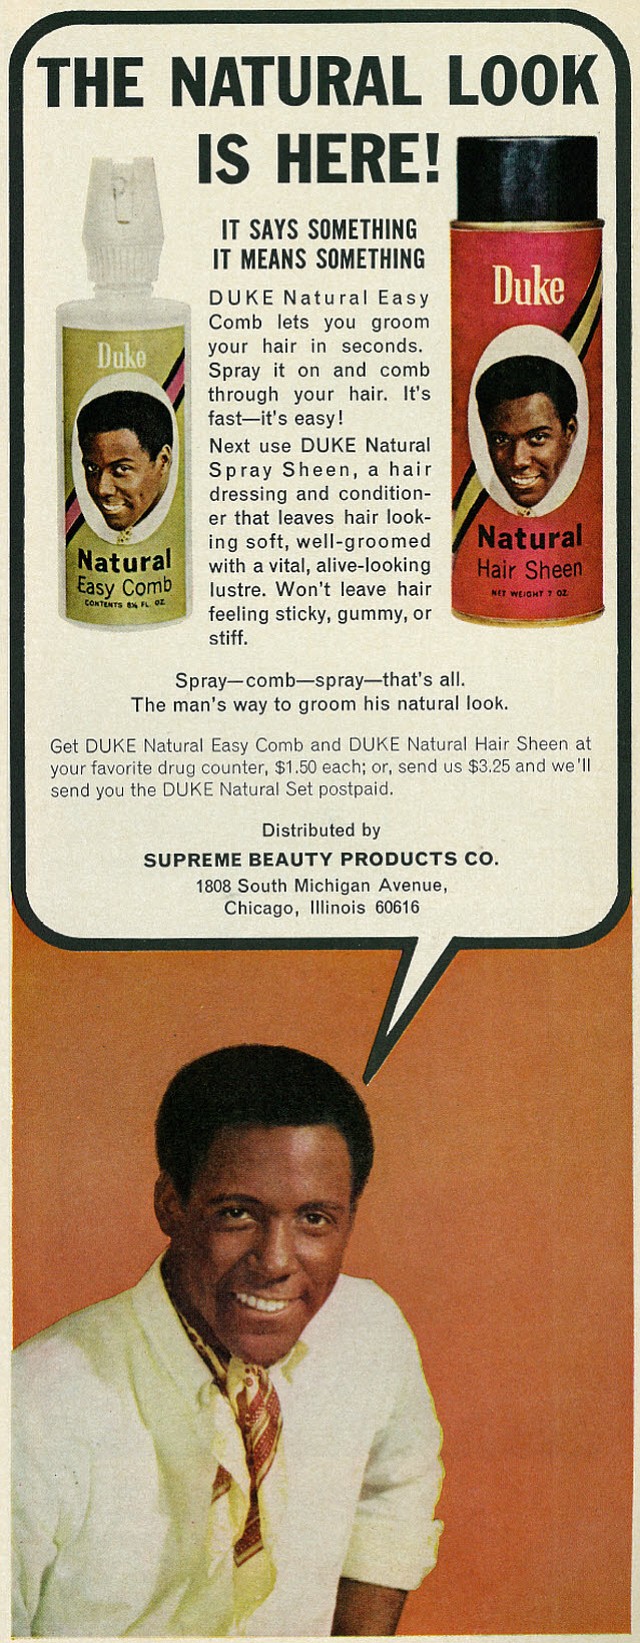 They say this Duke Hair Sheen is for bad mothers. Richard Roundtree for Supreme Beauty Products. "Ebony," January 1968.